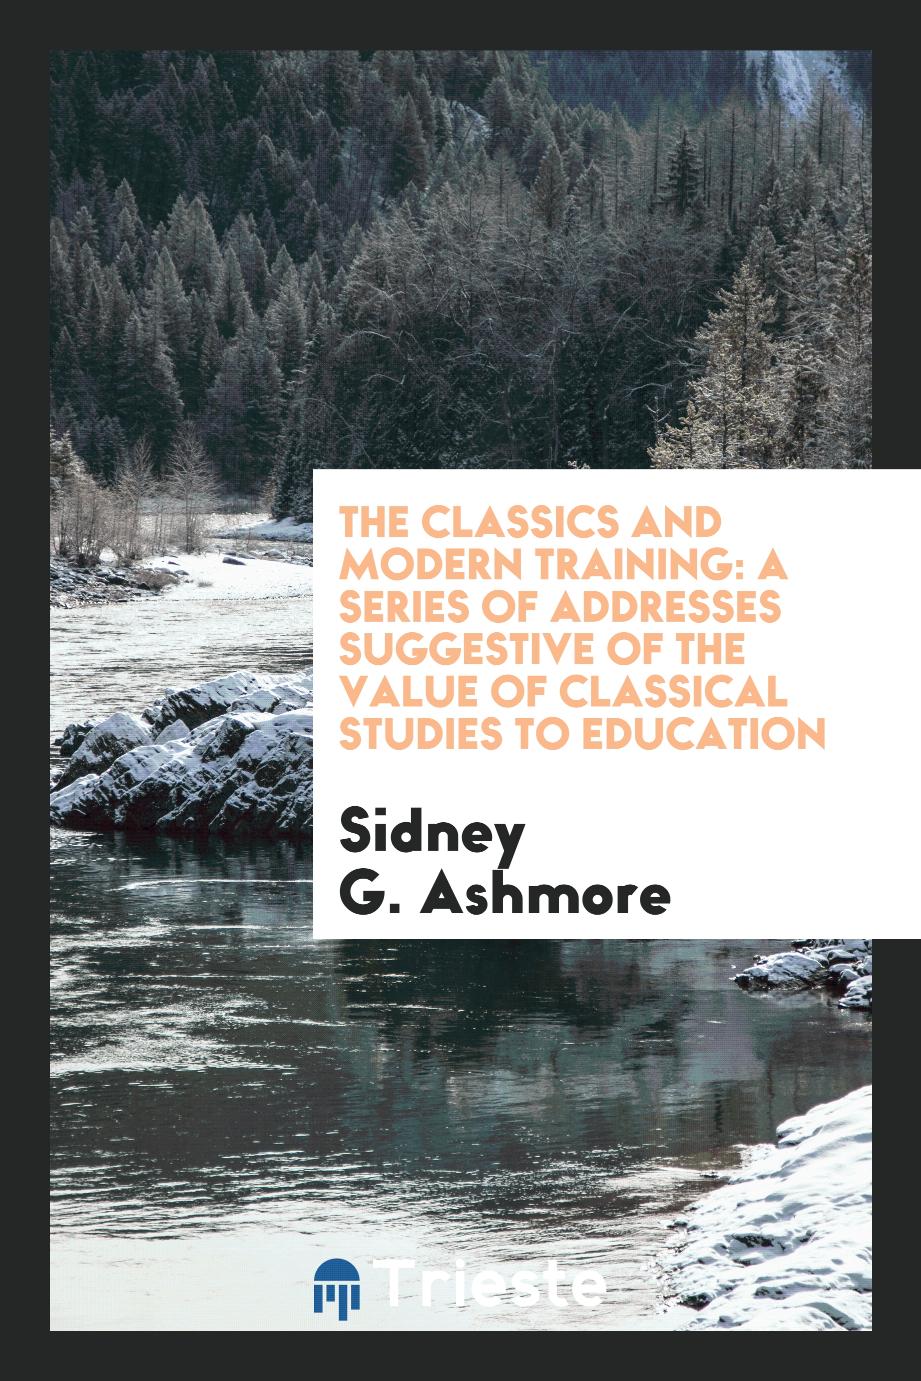 The Classics and Modern Training: A Series of Addresses Suggestive of the Value of Classical Studies to Education